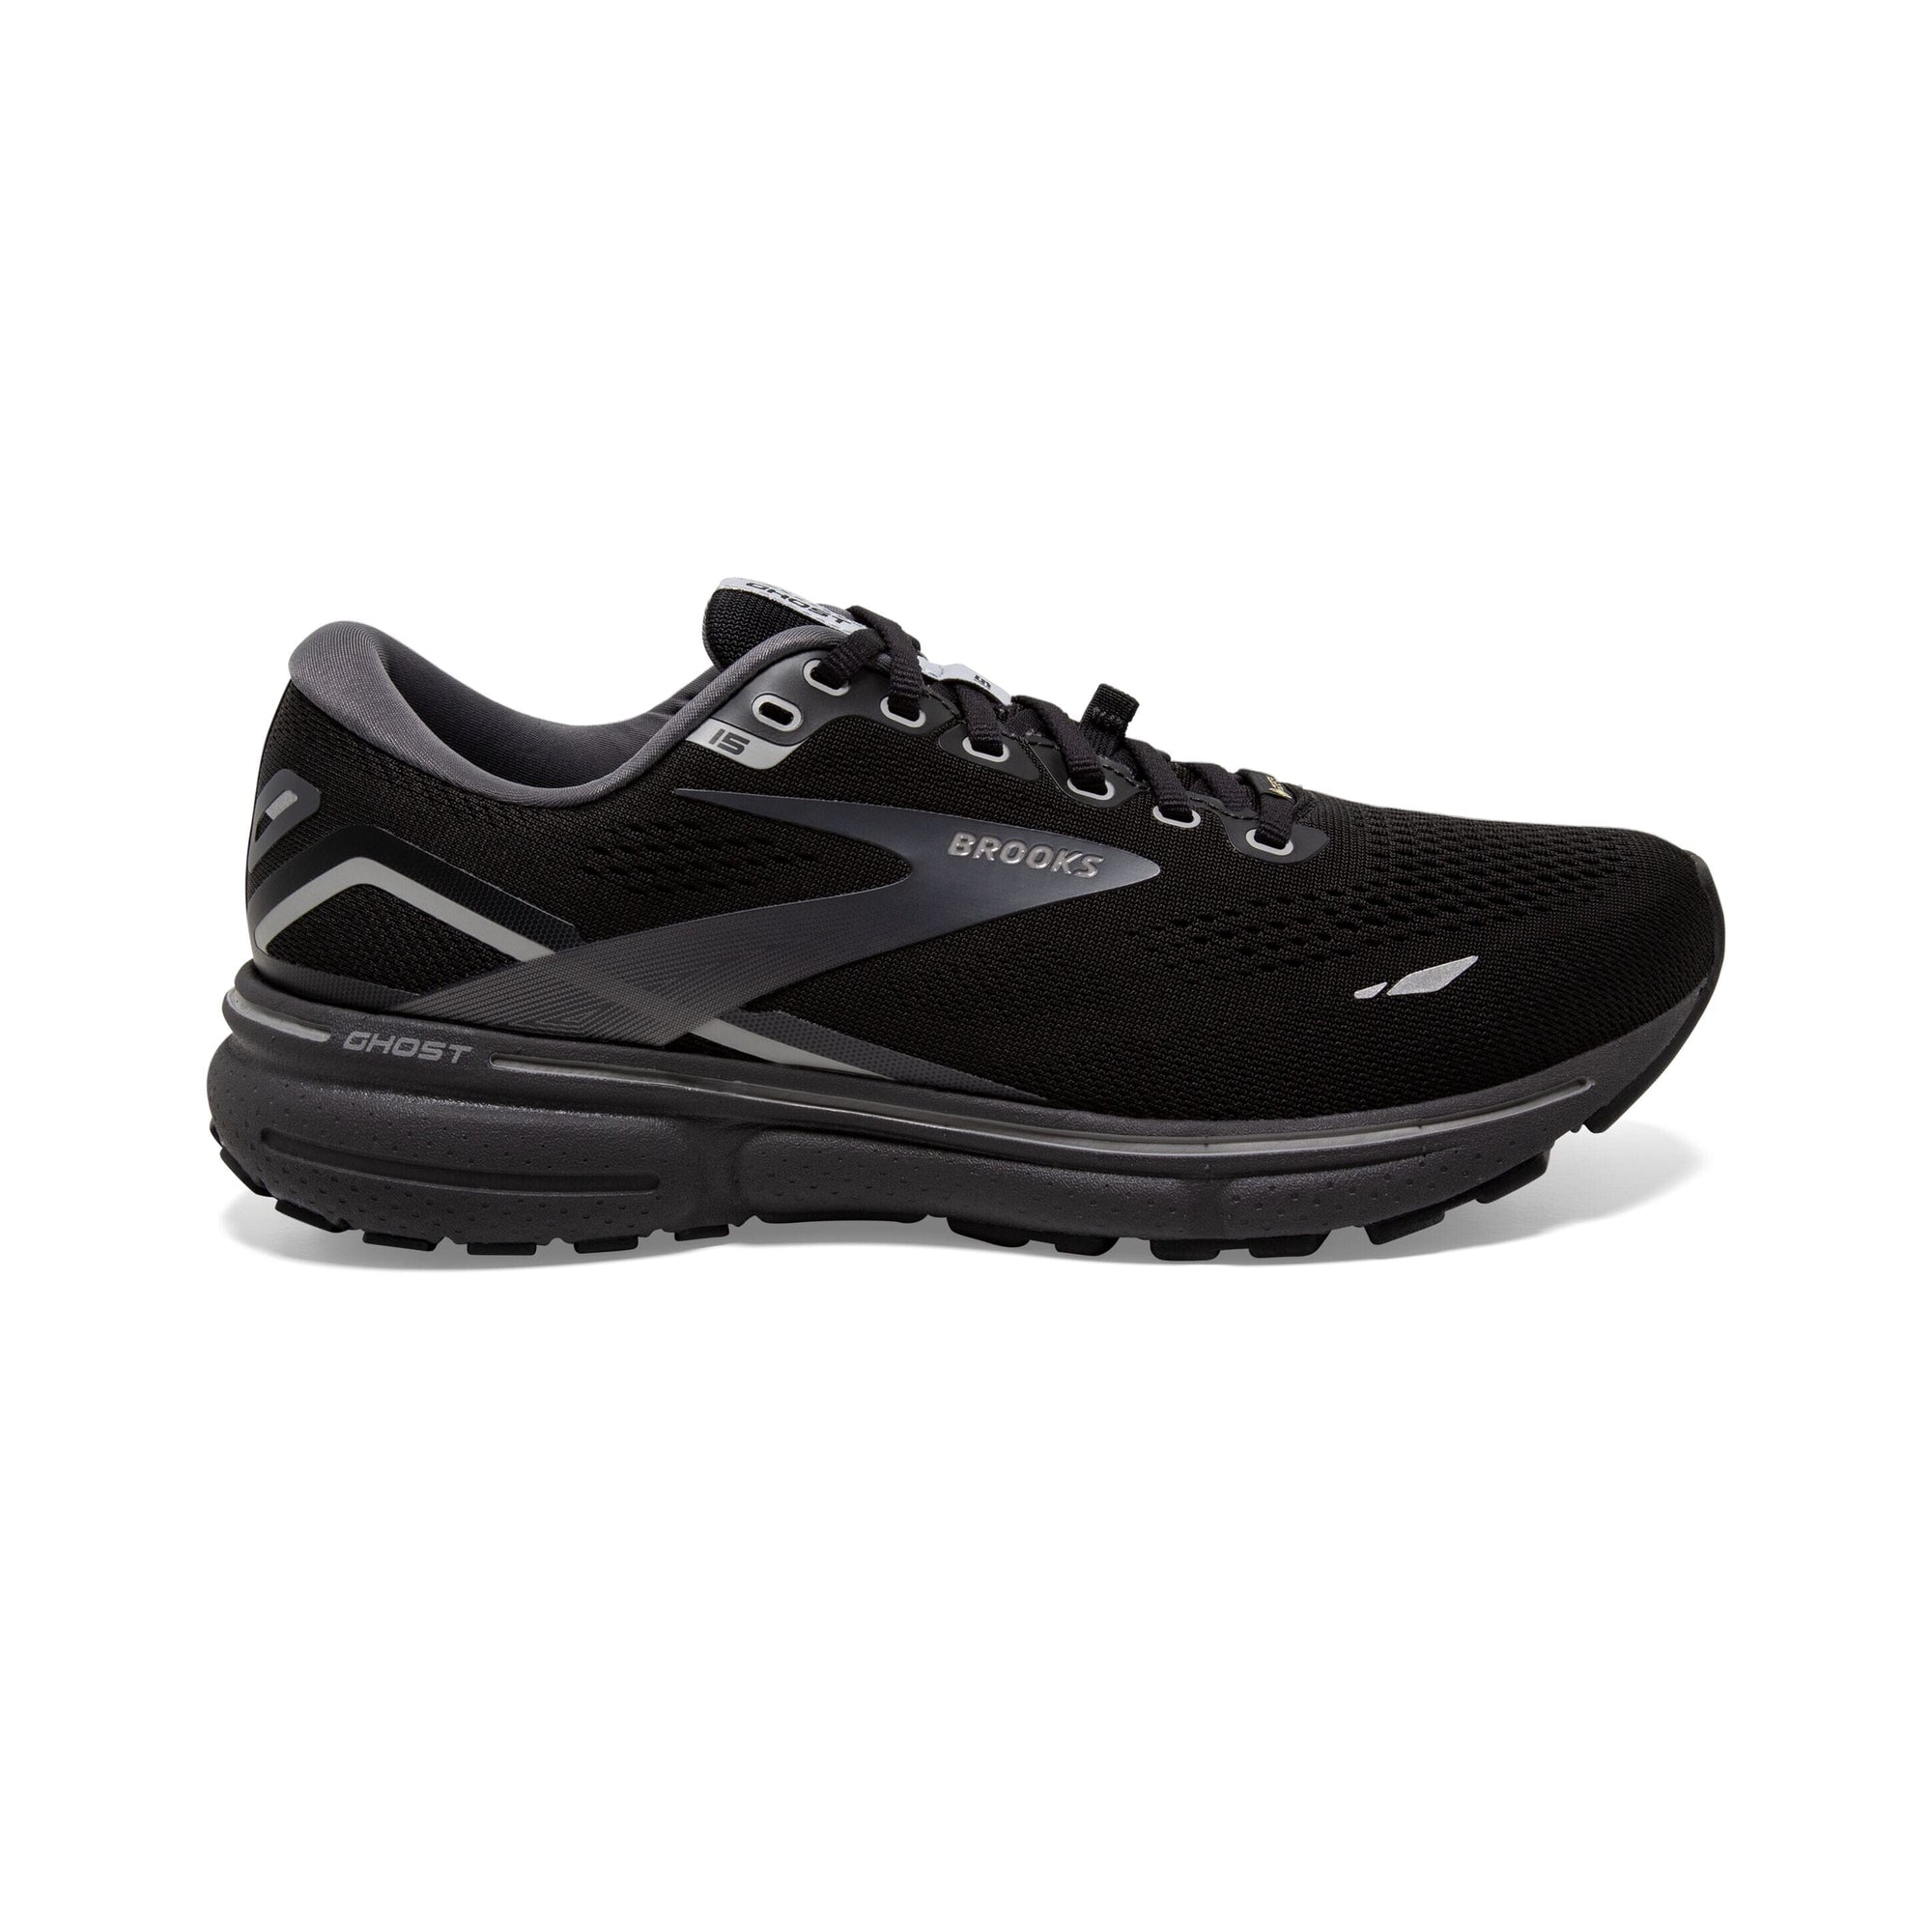 Brooks Ghost 15 GTX Men's Road Running Shoes Black/Blackened Pearl/Alloy US 8.5 